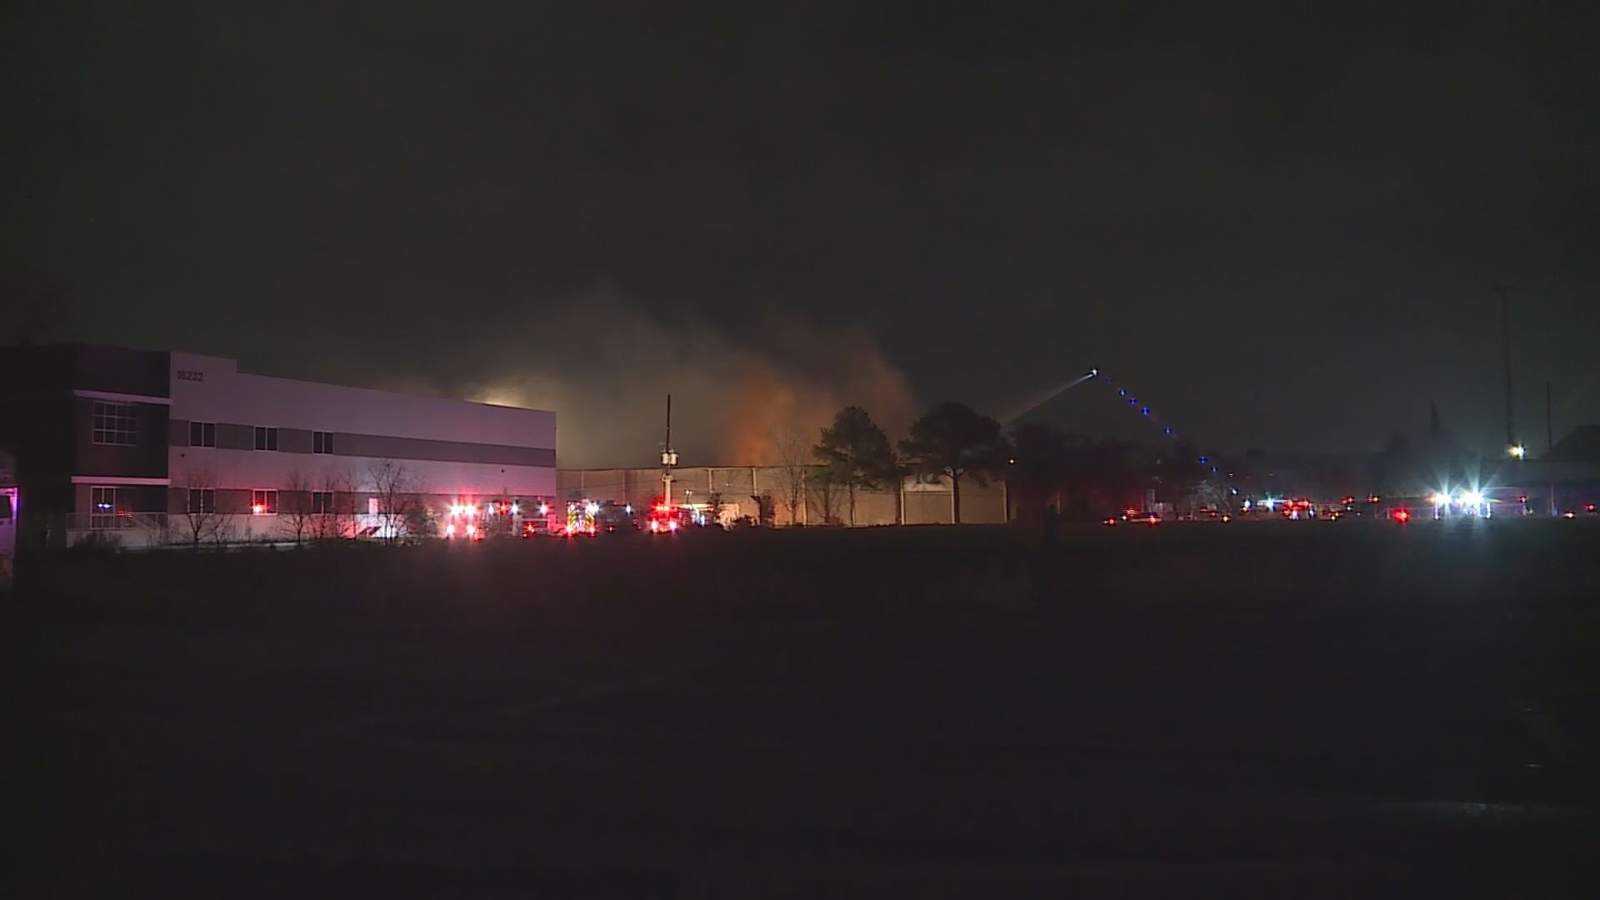 GALLERY: Firefighters battle blazes at unoccupied warehouse in northwest Houston, officials say